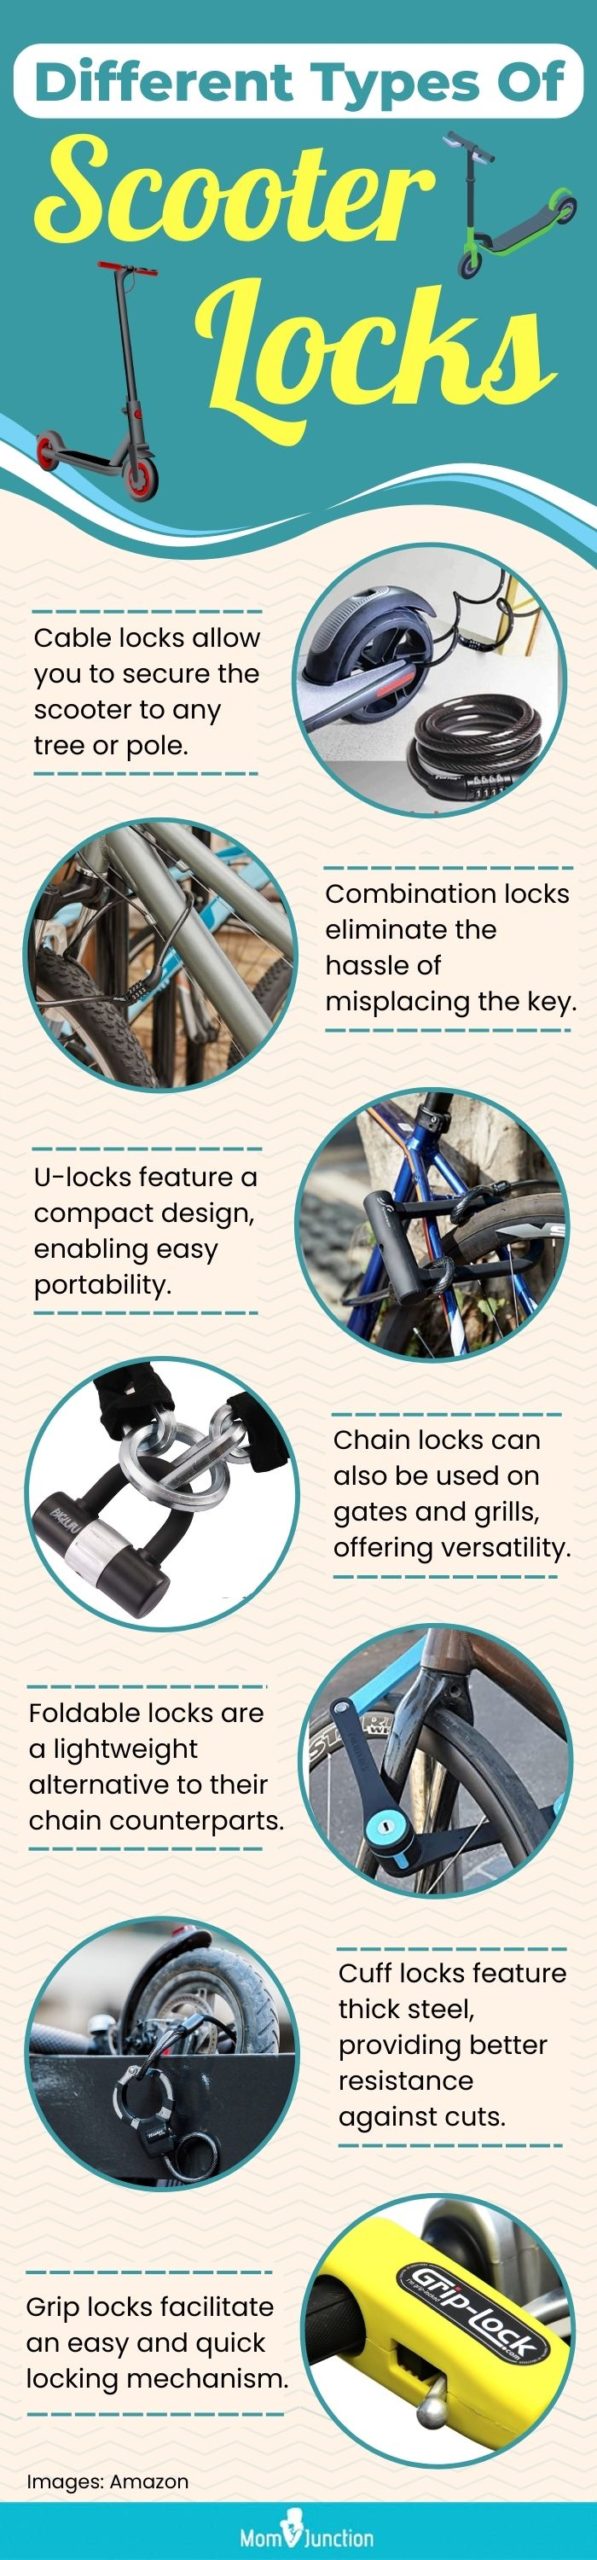 Different Types Of Scooter Locks (infographic)